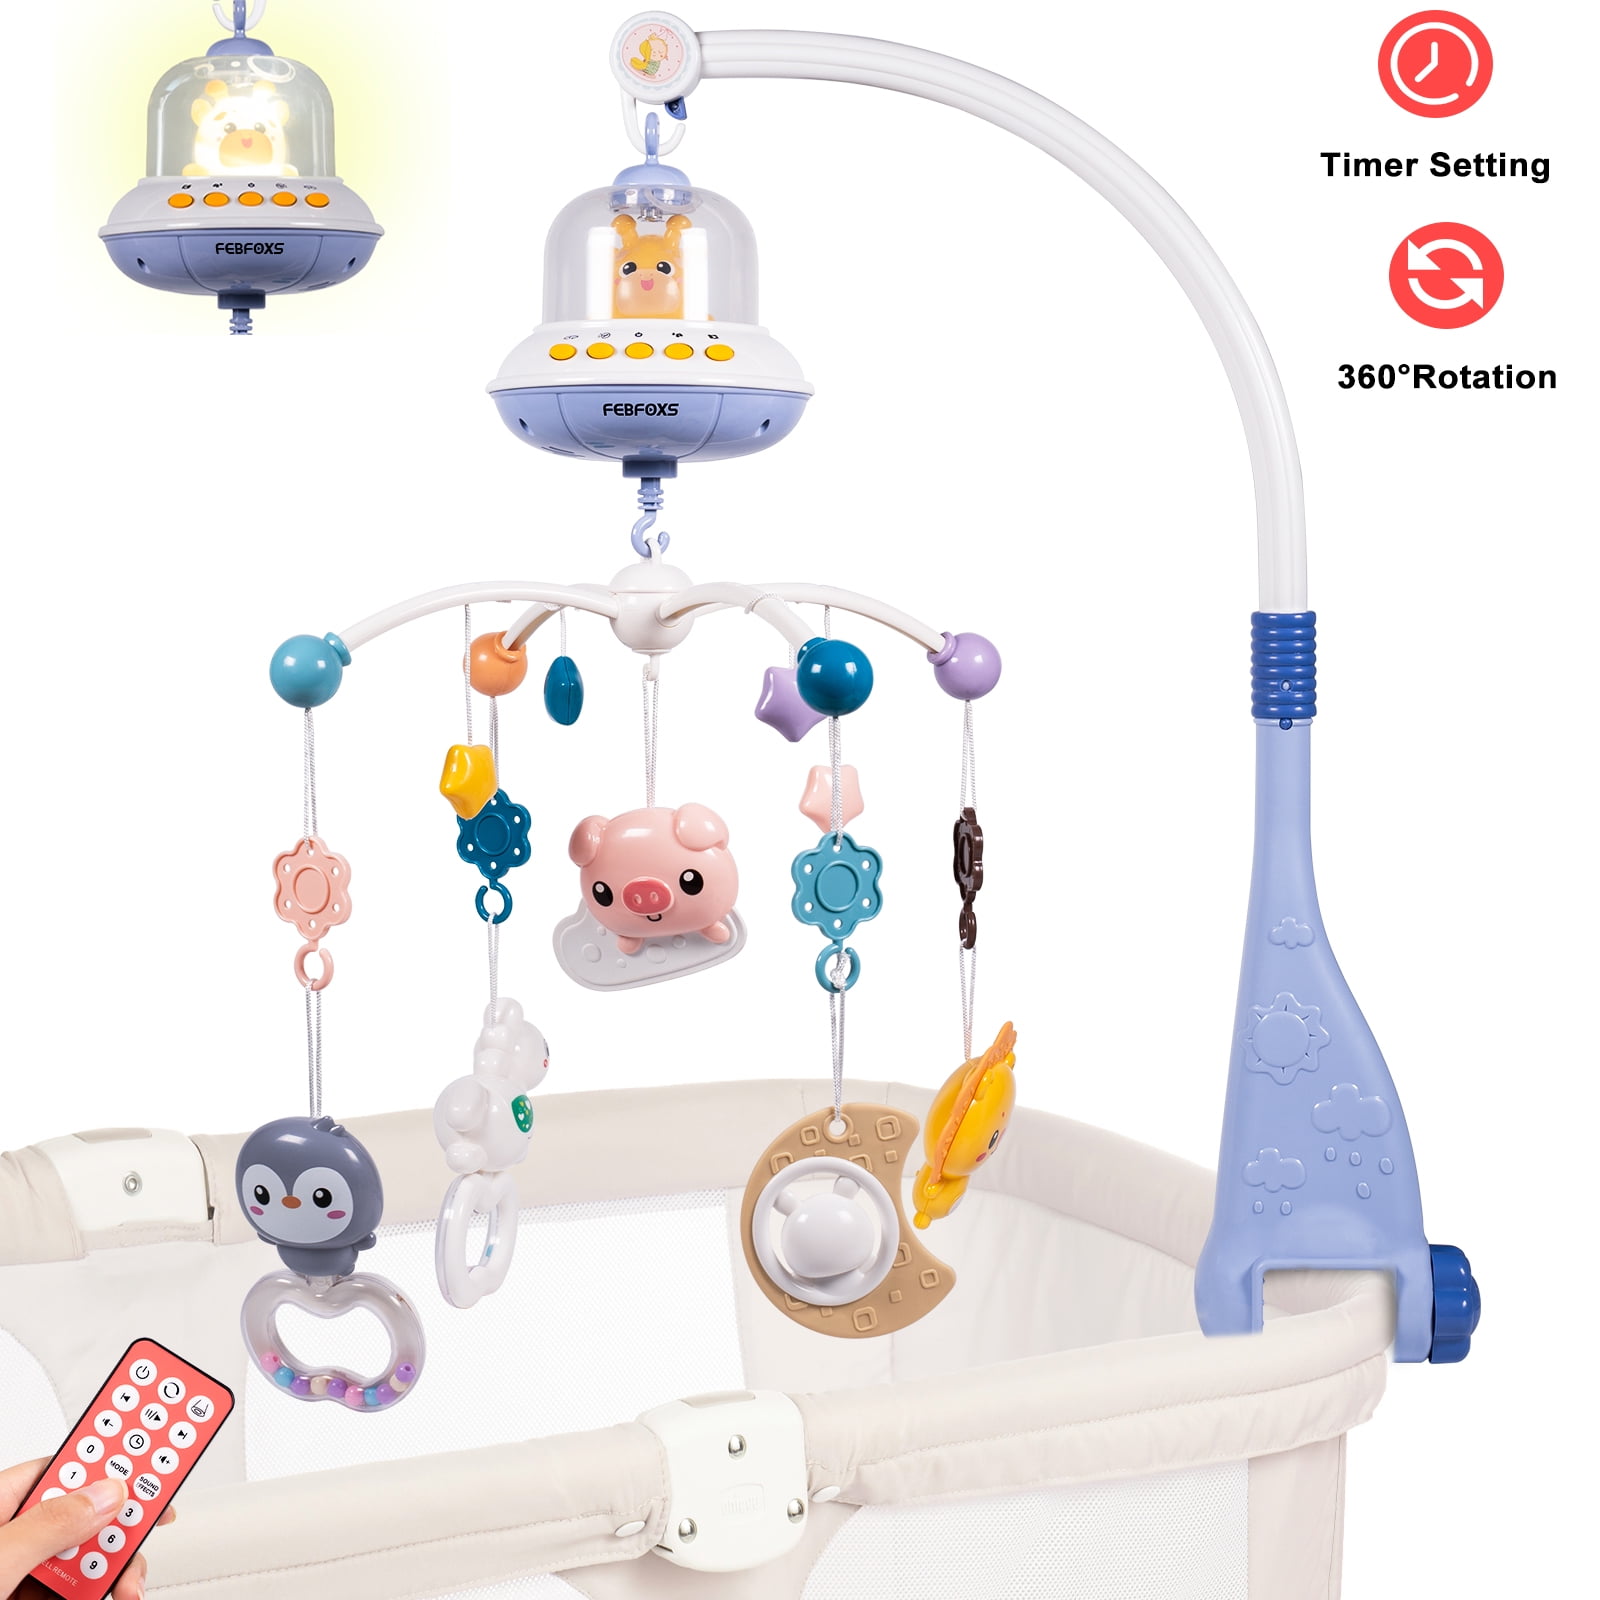 Lit bébé mobile, Hanging Baby Mobile pour berceau avec veilleuse - Baby  Crib Toys Nursery Toys 360 Rotation Star Projection Baby Soothing Toys For  Babies A